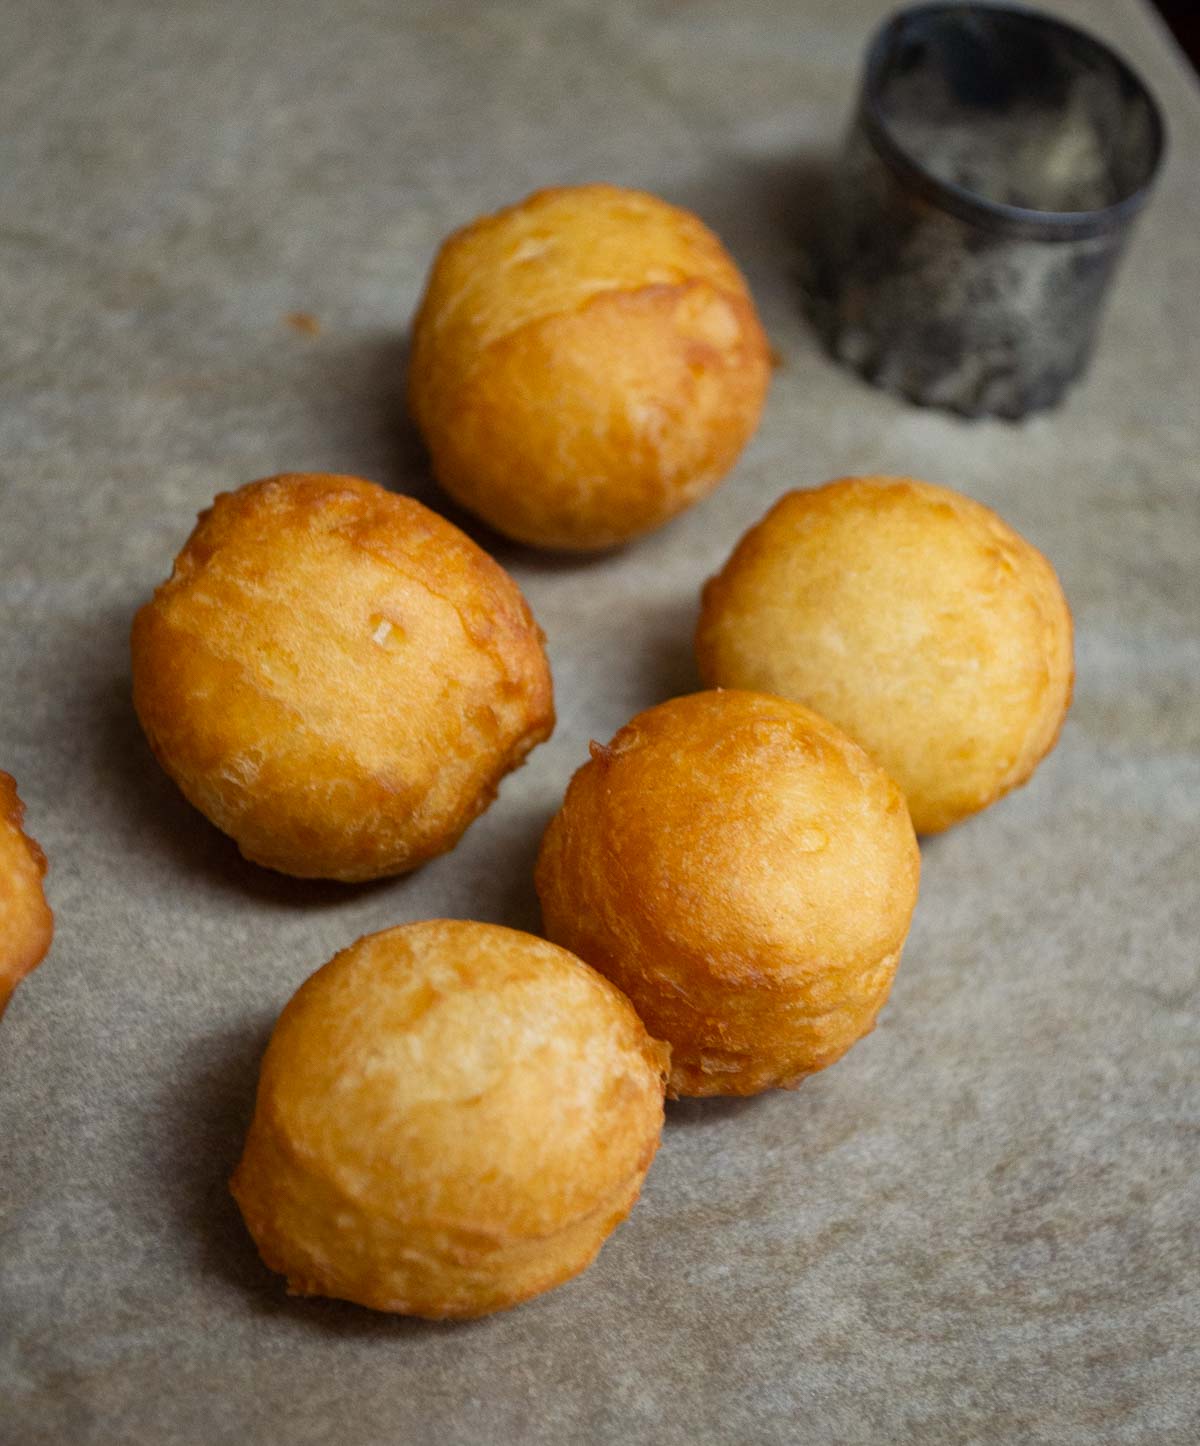 Fried donut holes from canned biscuit dough